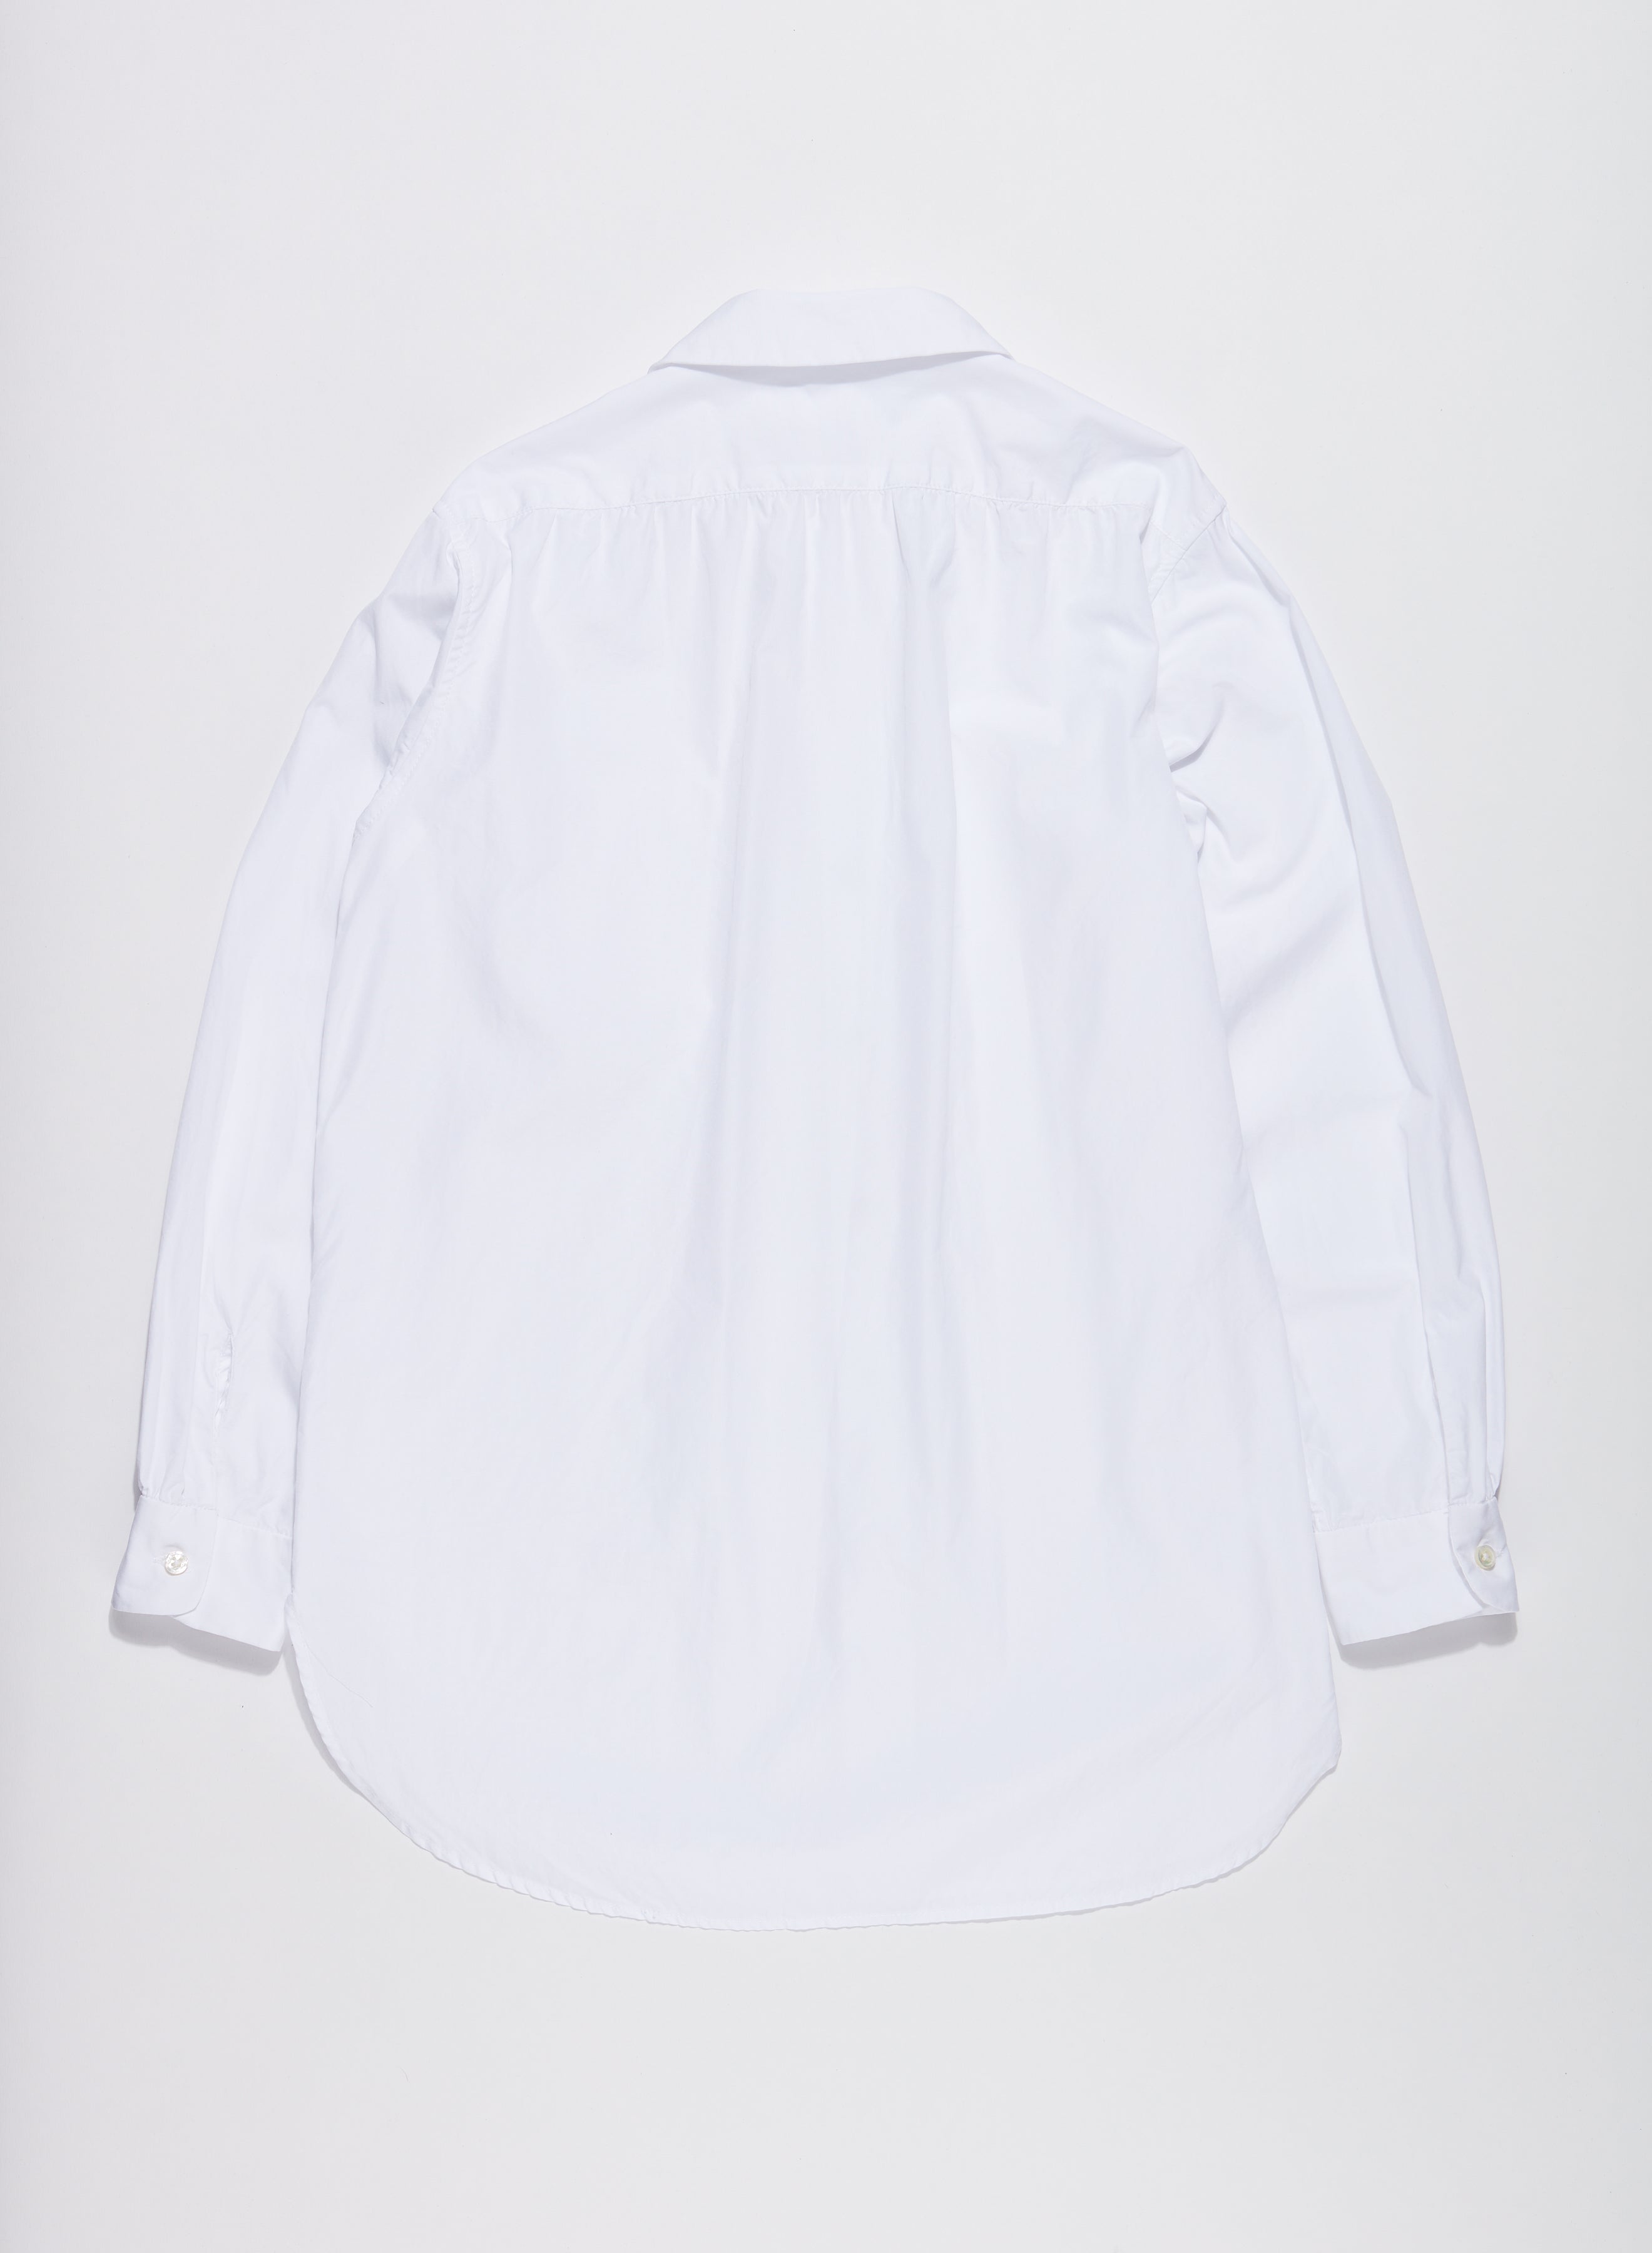 Engineered Garments Rounded Collar Shirt - White 100's 2Ply Broadcloth